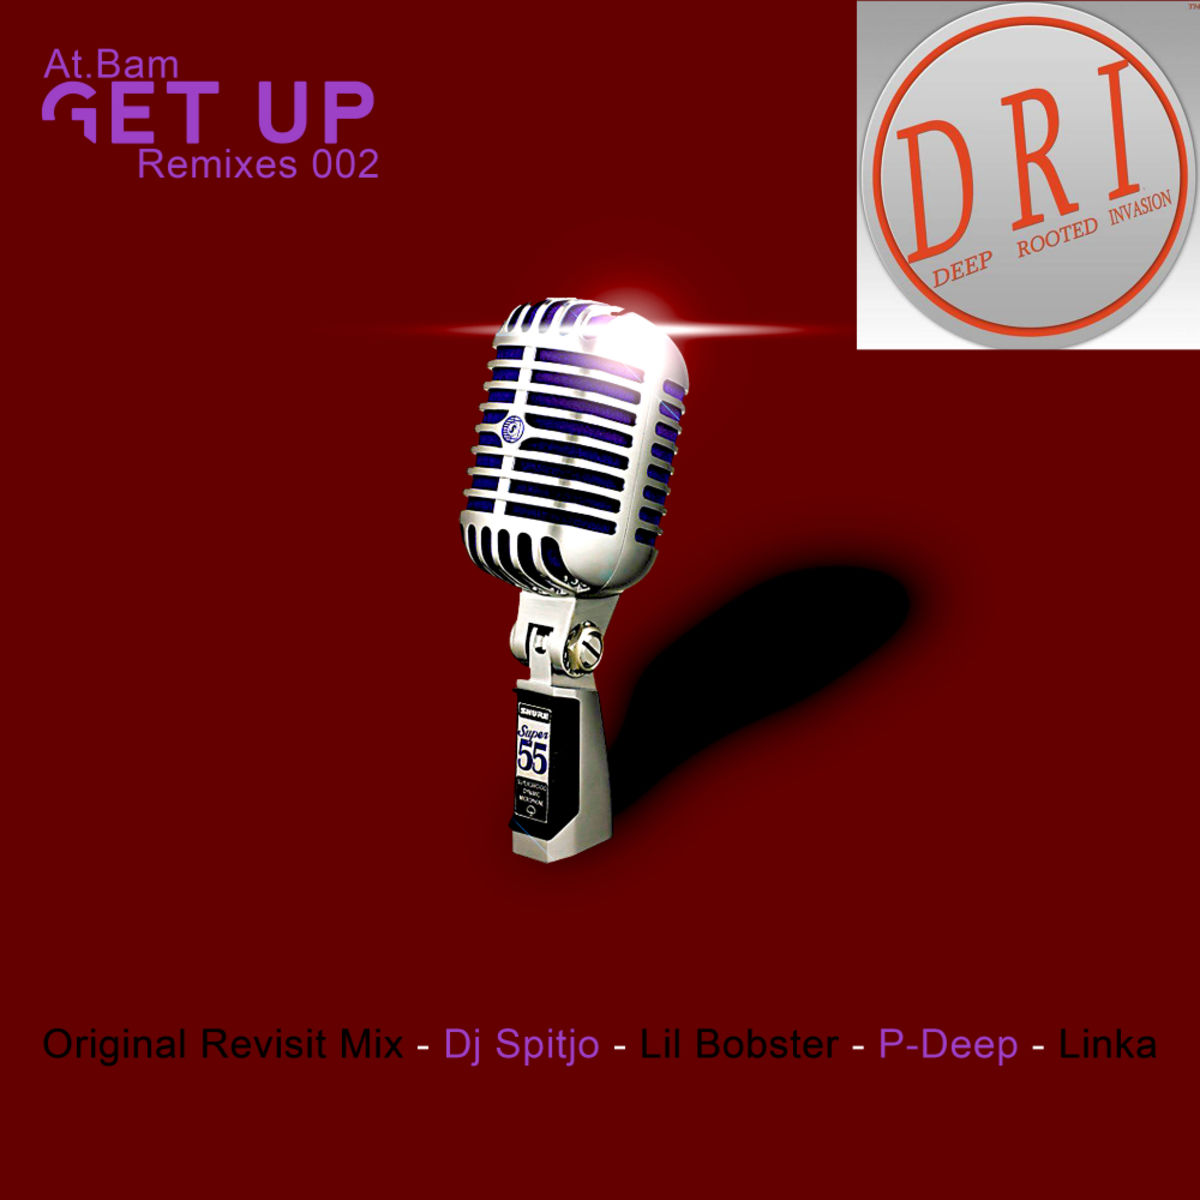 At. Bam - Get Up (Remixes 002) / Deep Rooted Invasion Productions